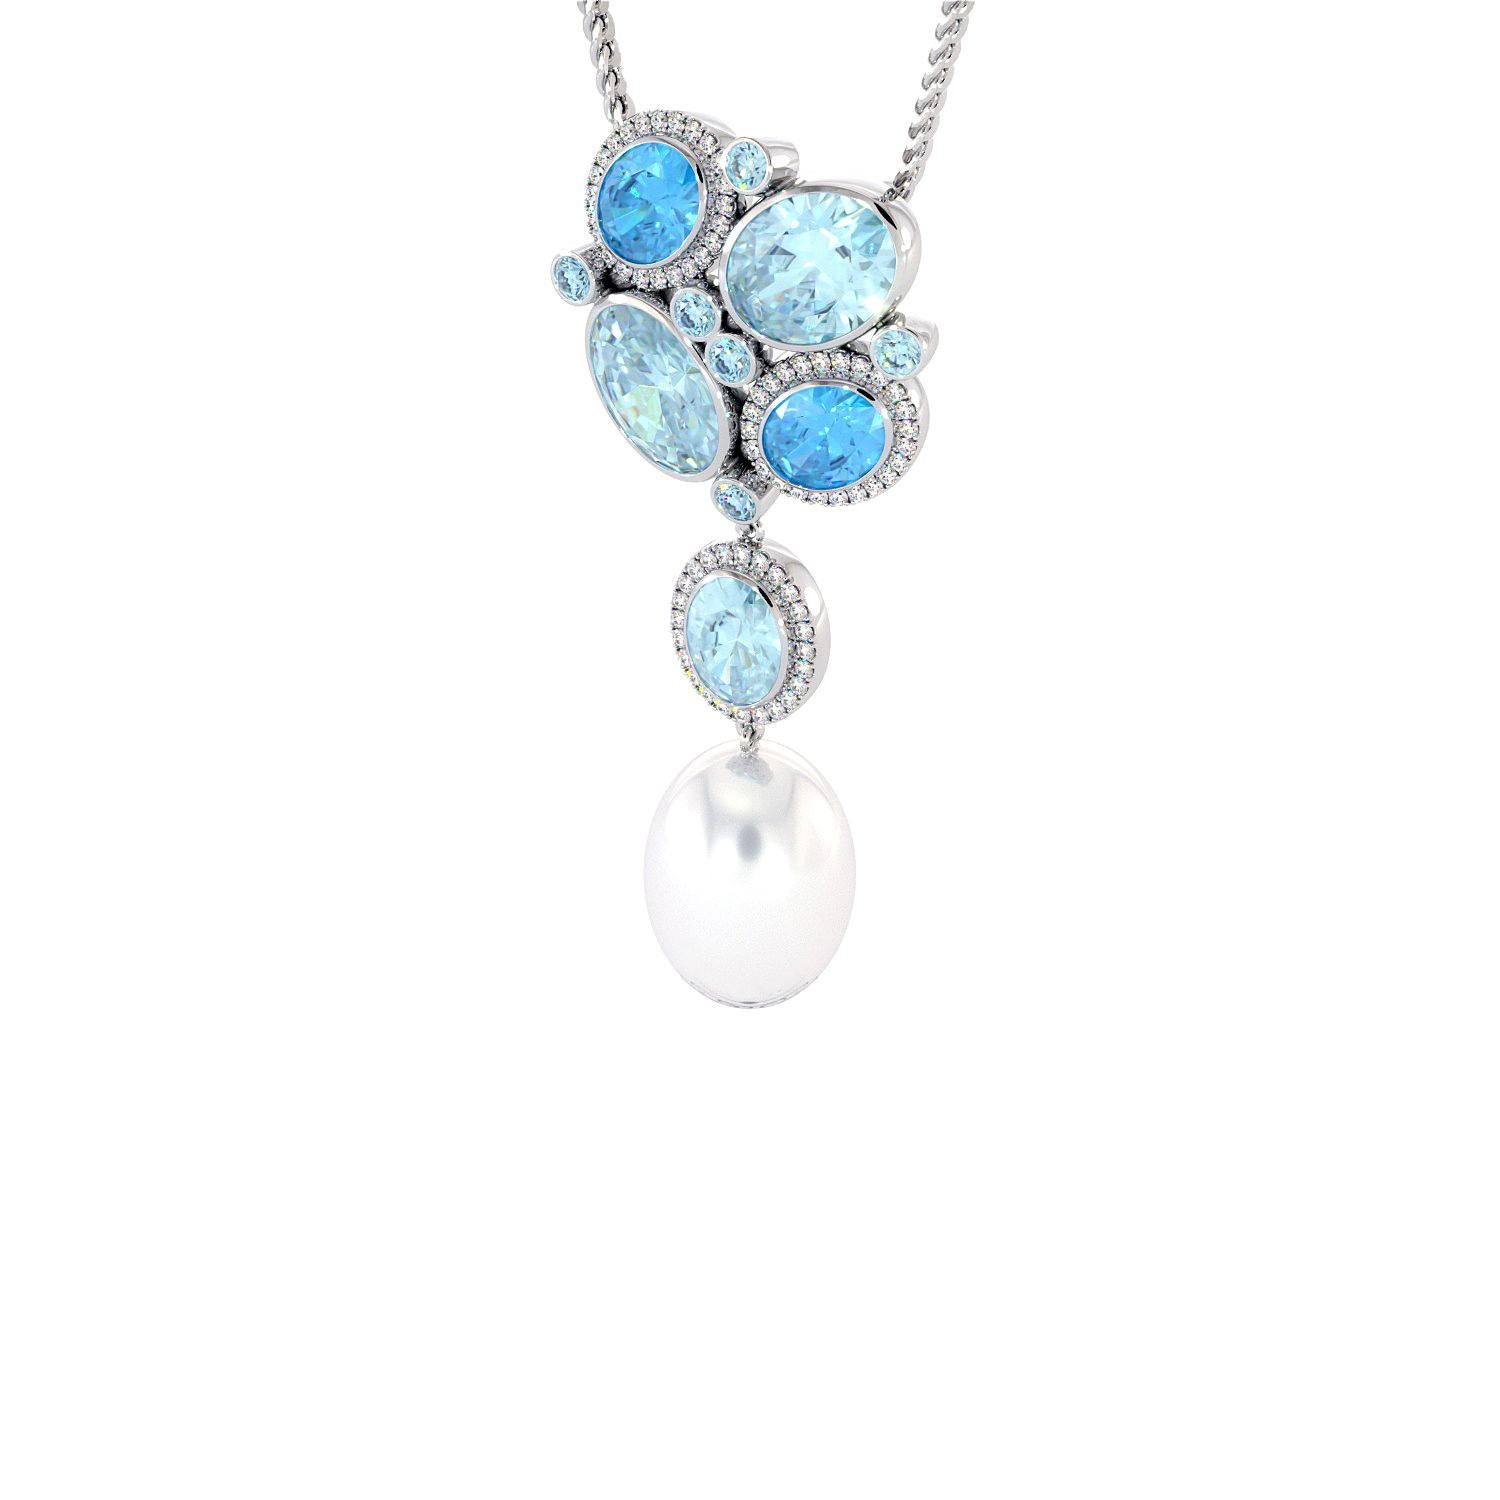 This sophisticated pendant is part of Summer Sky Collection. Designed by Emilia Lekarrier, Handcrafted and made in Canada, using high quality diamonds and gemstones. Certified by CGA & GIA Appraiser.

Metal: 14kt White Gold
Diamond Clarity: